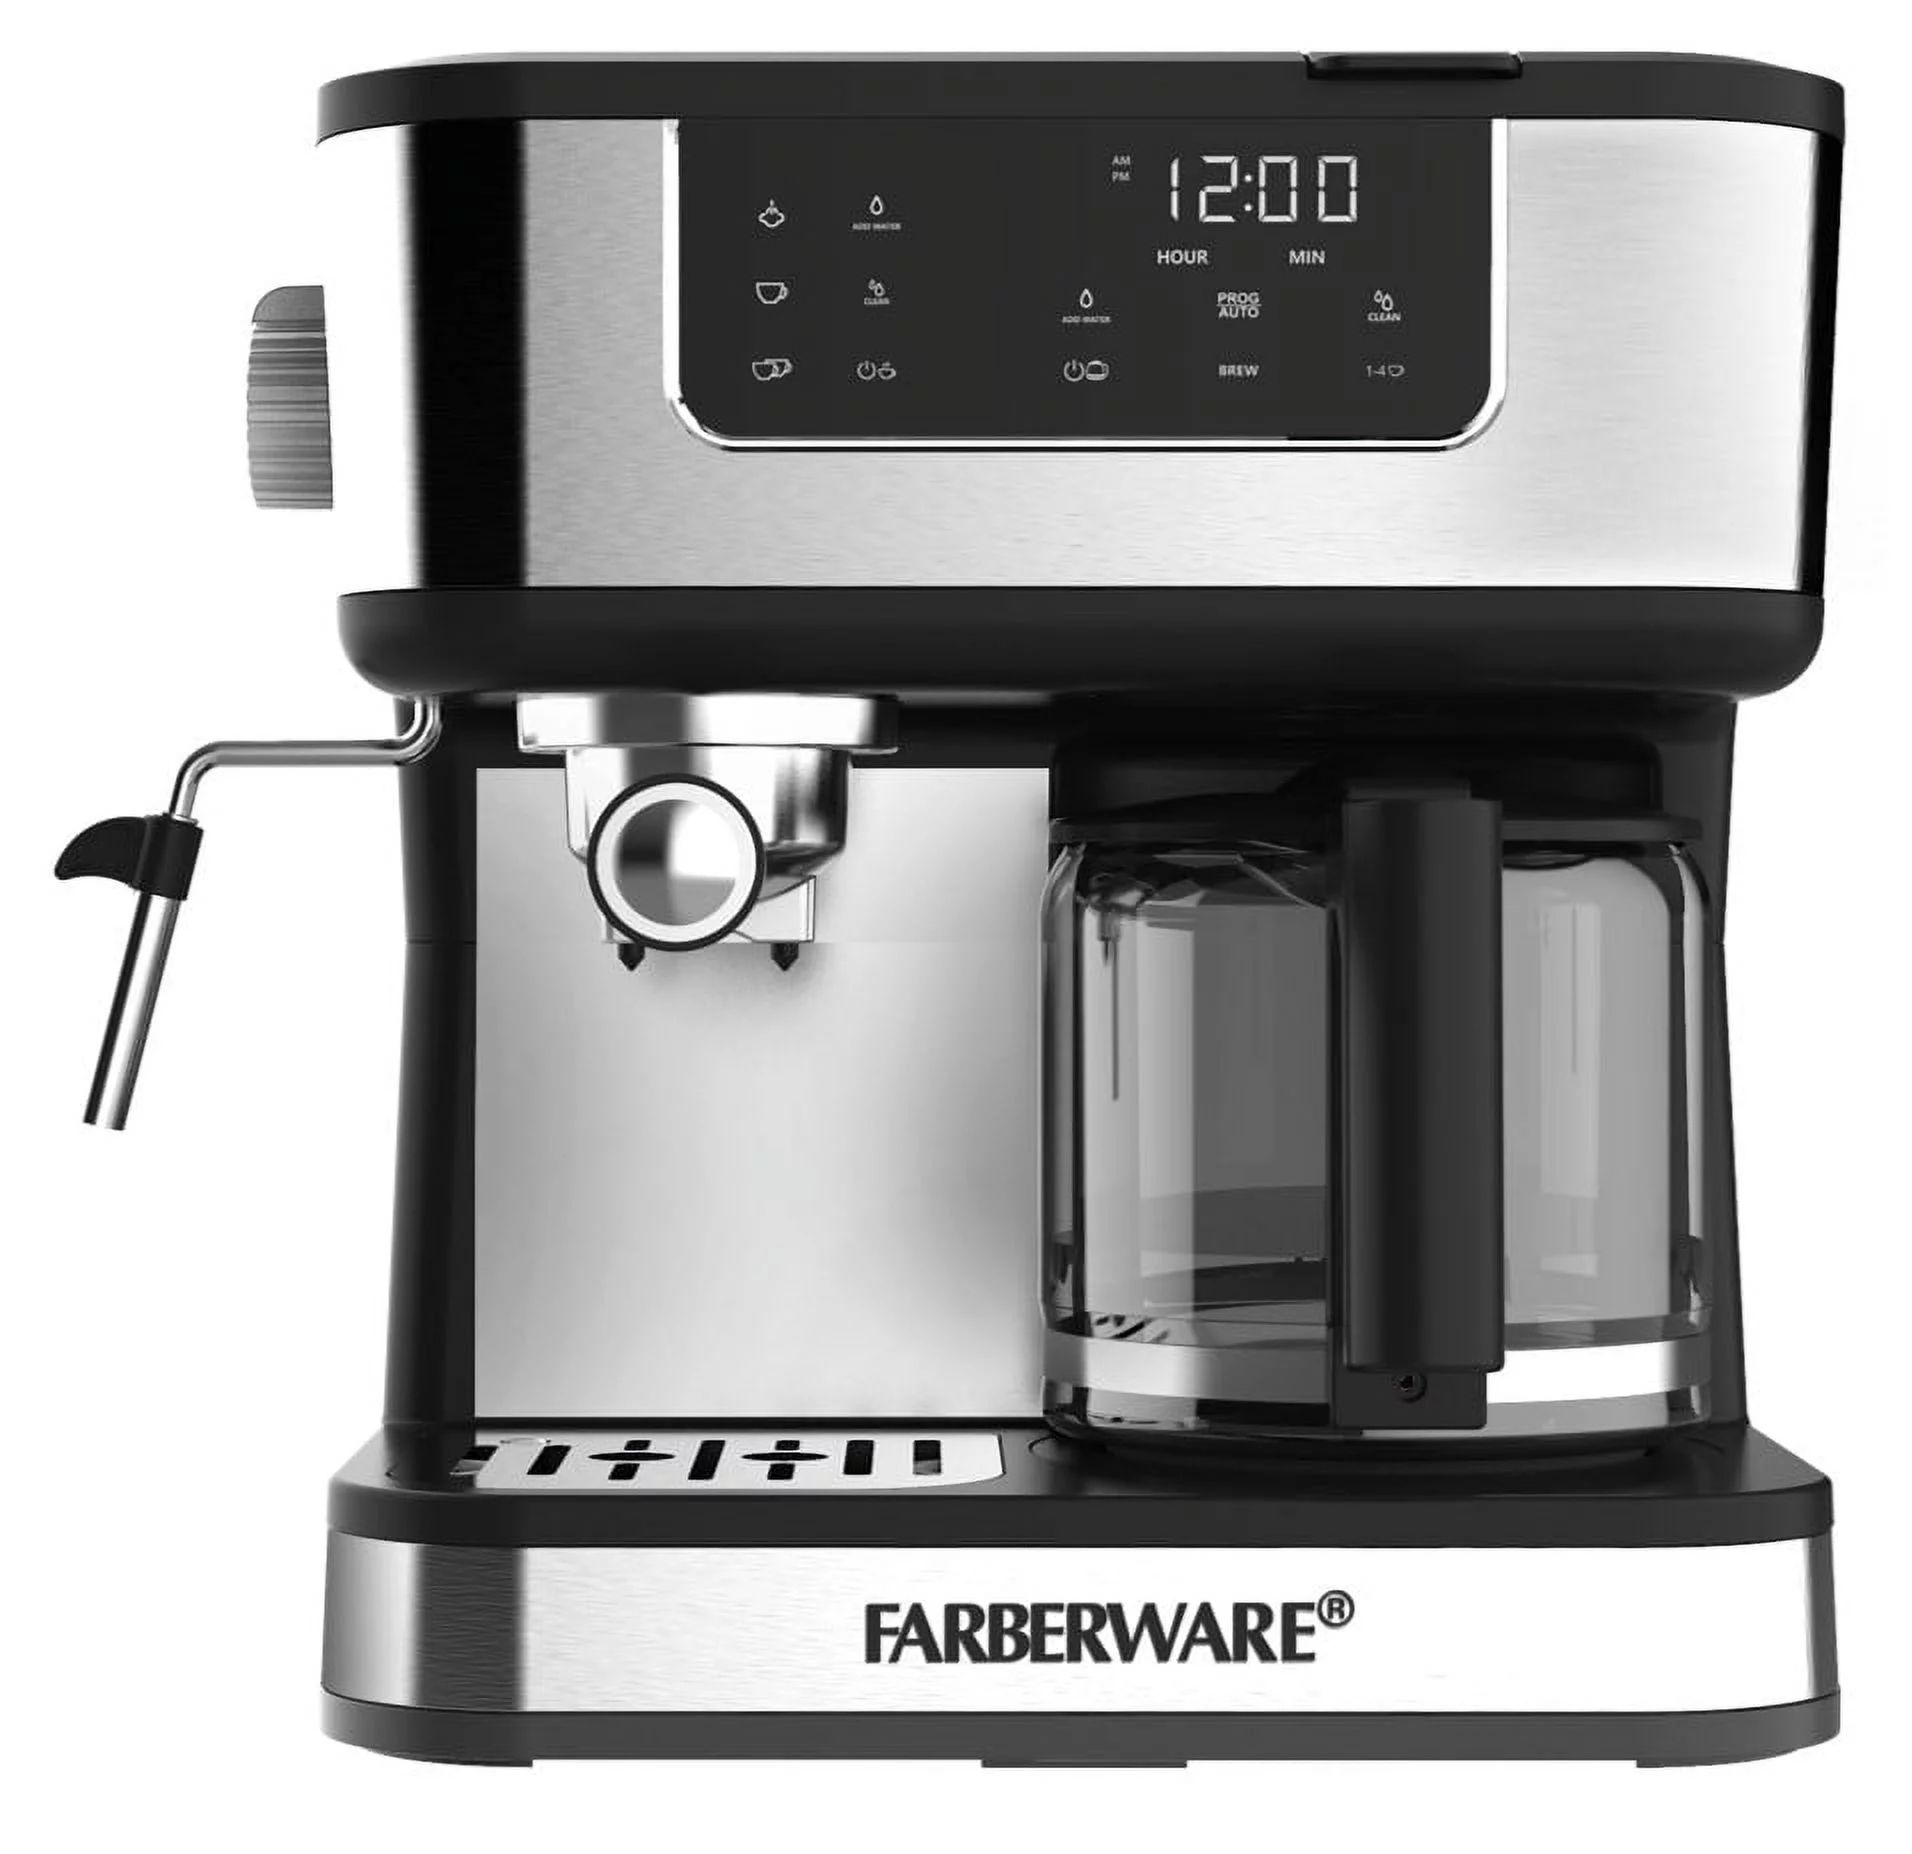 Farberware Dual Brew, 10 Cup Coffee + Espresso, Black and Stainless Finish, Touchscreen Display, ... | Walmart (US)